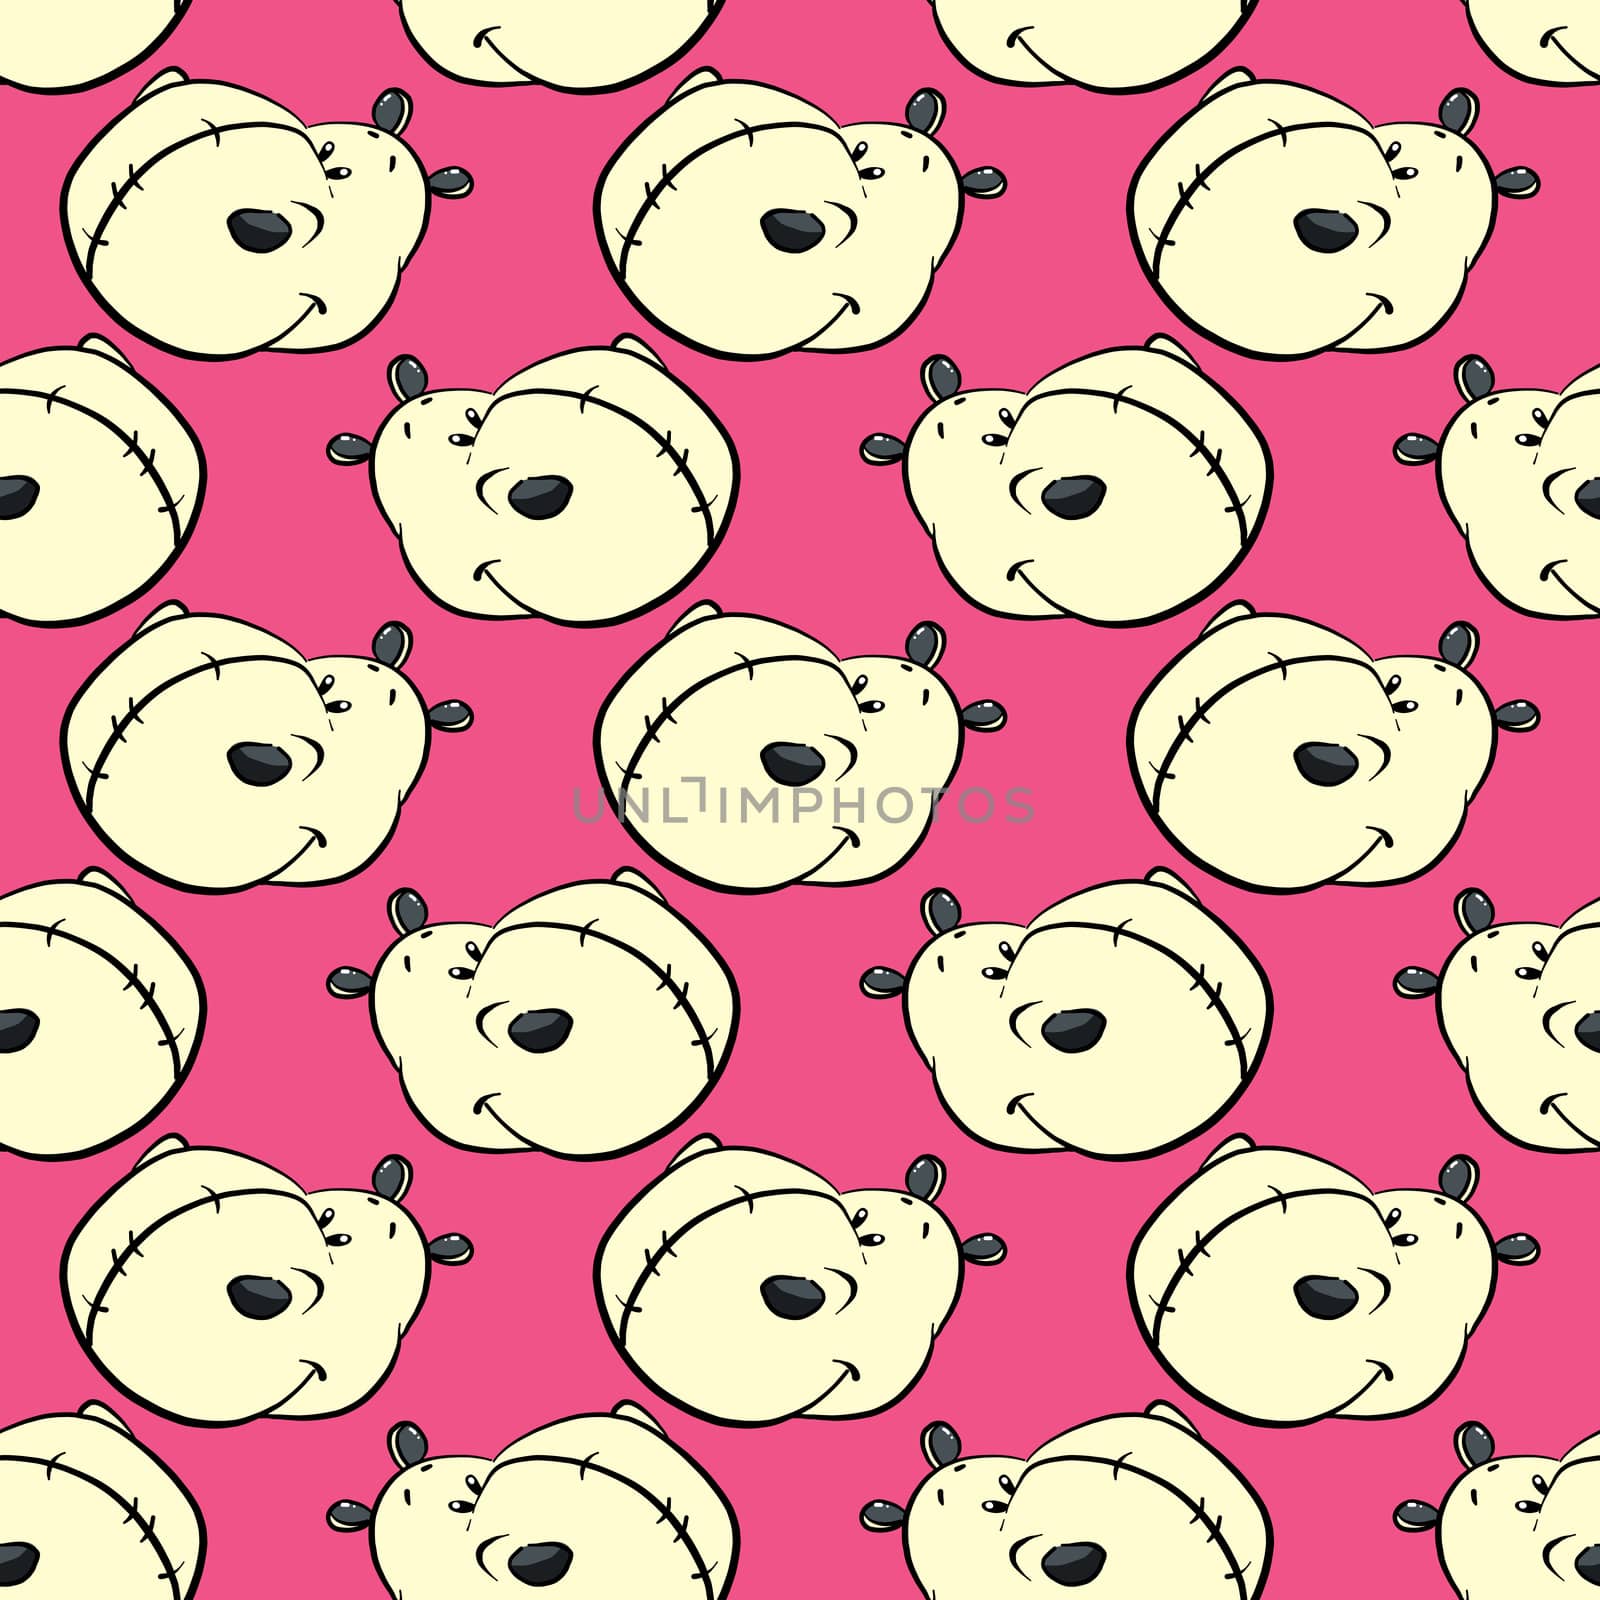 Hippos pattern , illustration, vector on white background